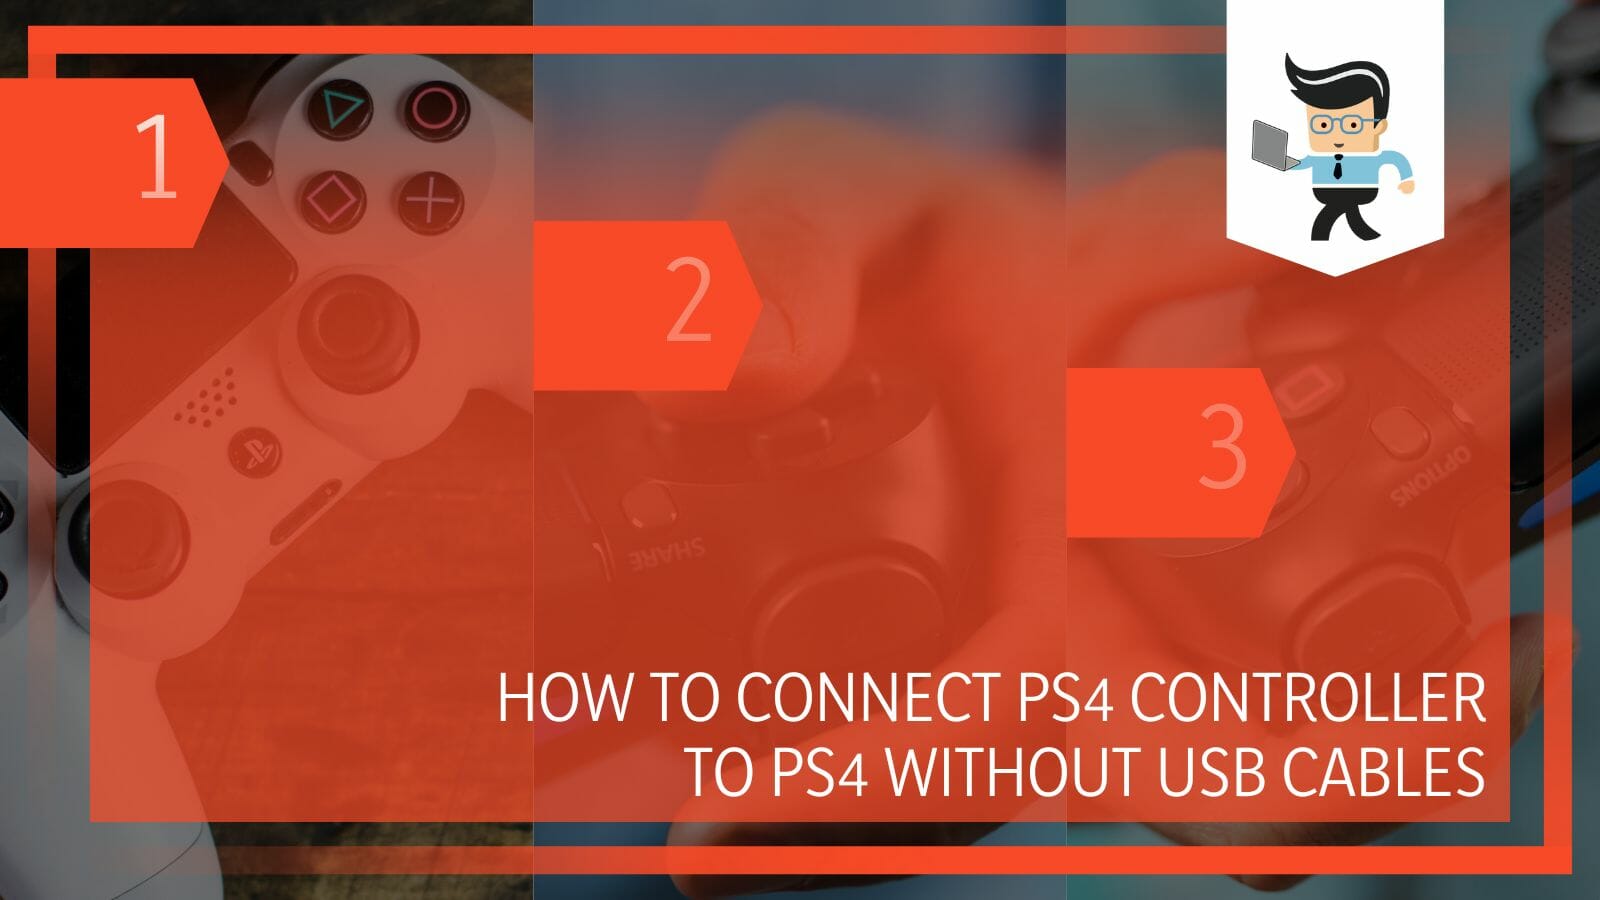 How to Connect PS4 Controller to PS4 Without USB Cables